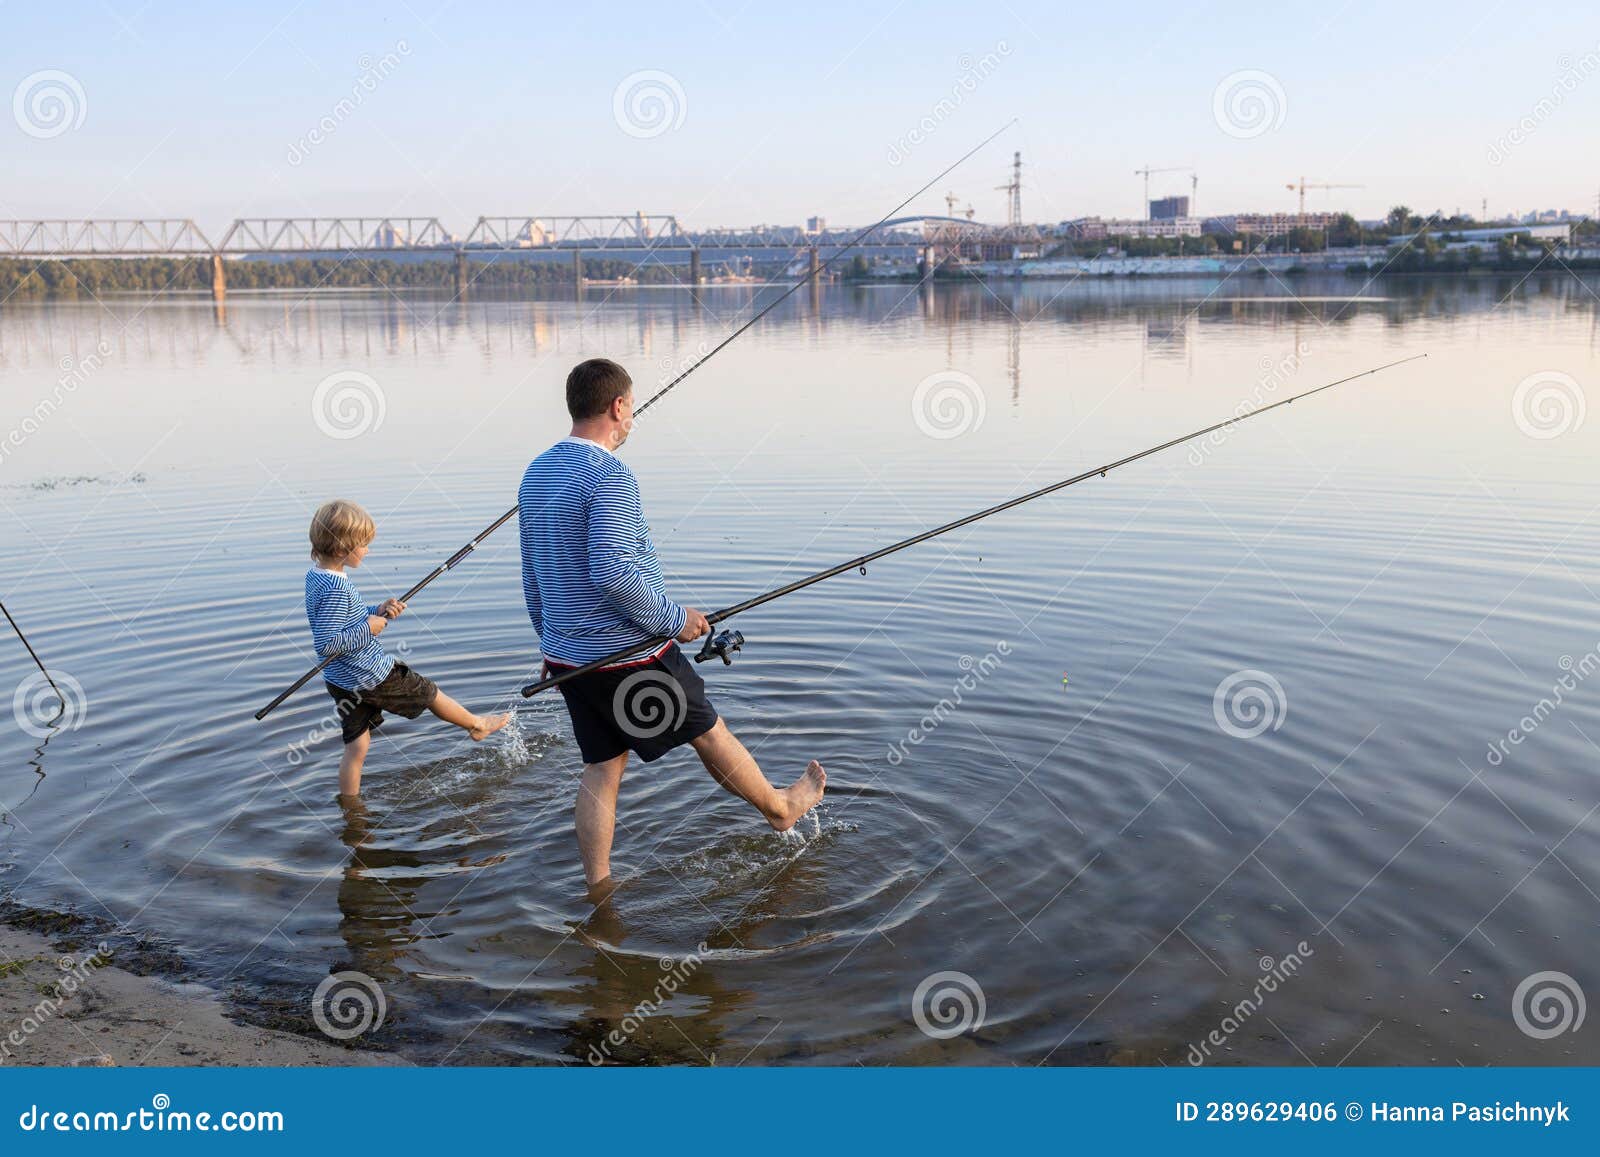 Dad and Son Go Fishing Together, Stand in the Water with Fishing